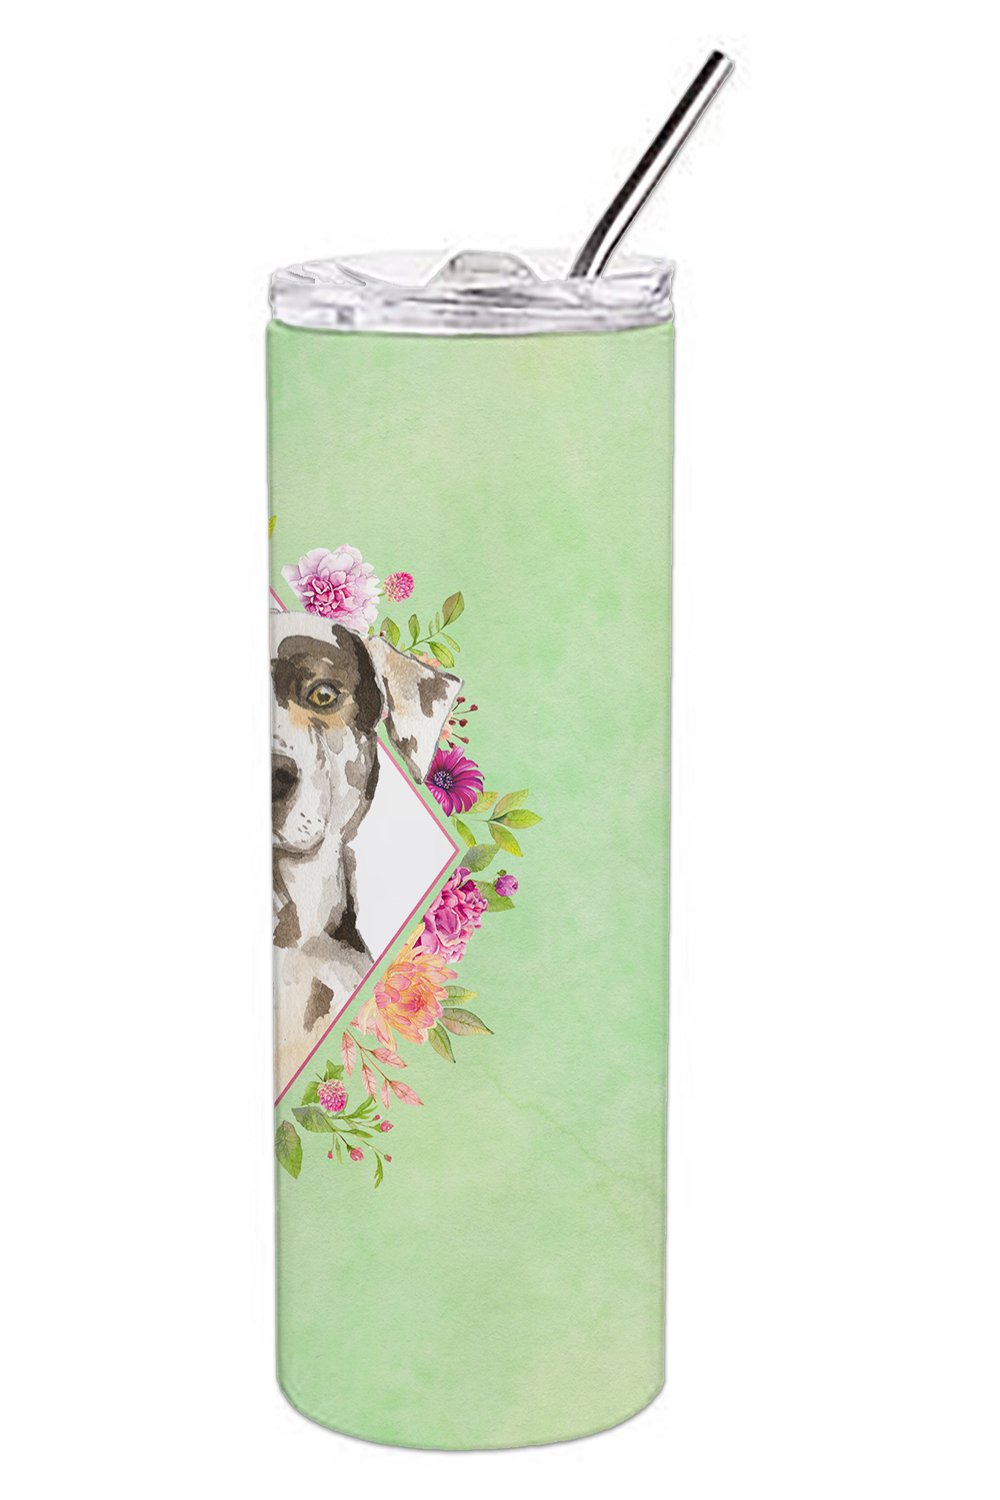 Catahoula Leopard Dog Green Flowers Double Walled Stainless Steel 20 oz Skinny Tumbler CK4409TBL20 by Caroline's Treasures